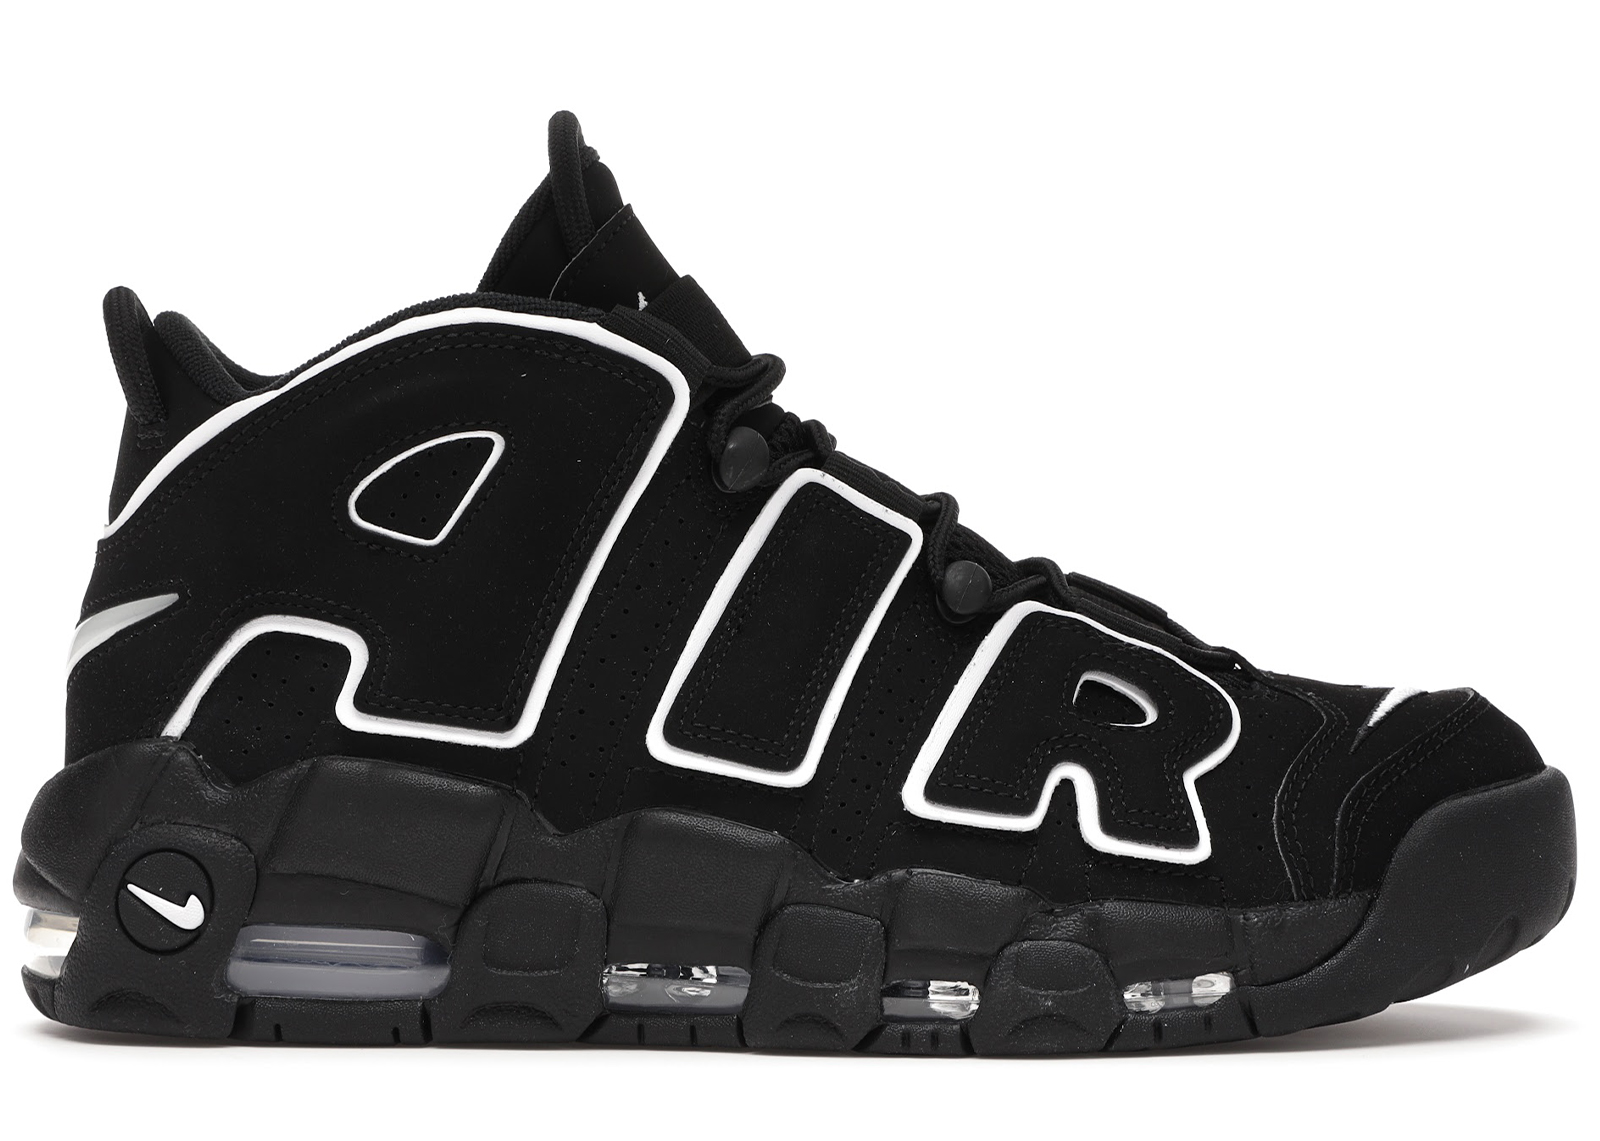 Buy Nike Basketball Air Uptempo Size 9 Shoes & New Sneakers - StockX